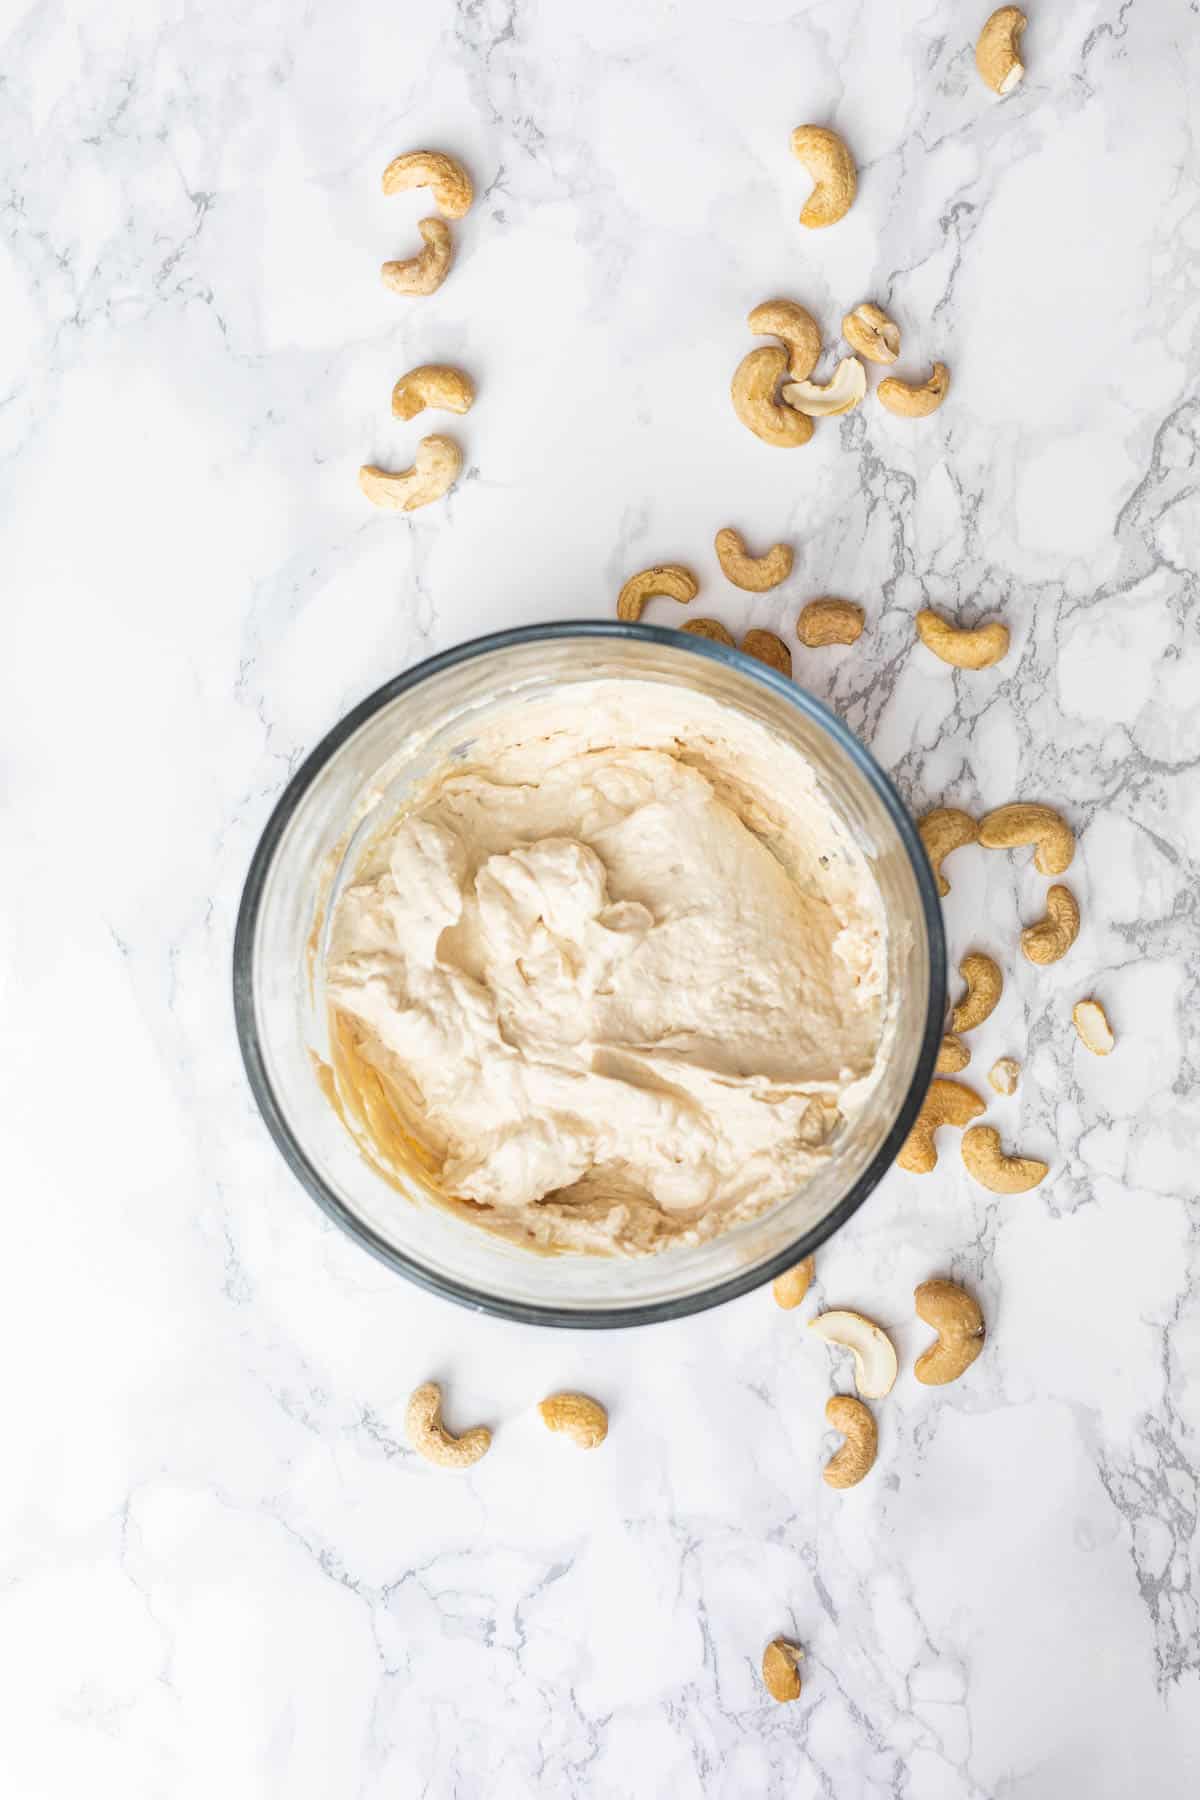 Cultured cashew cheese in glass dish surrounded by whole cashews on white marble surface